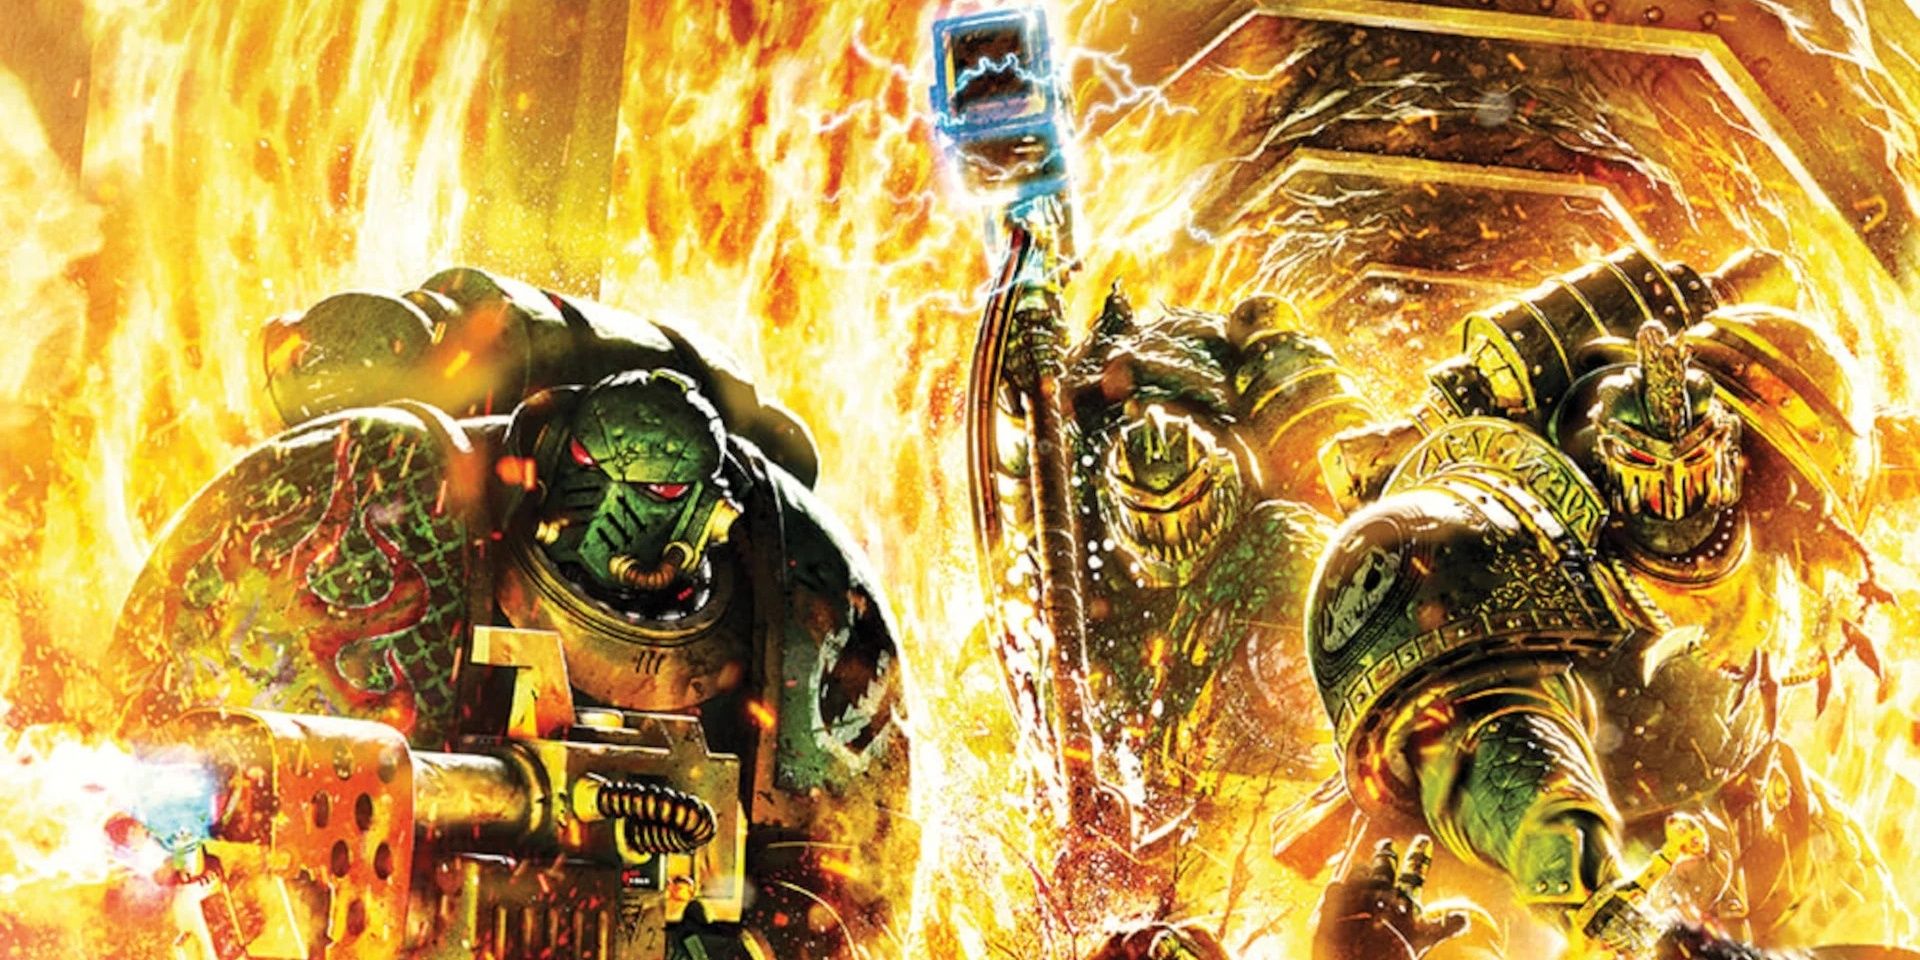 Three Salamanders Space Marines stand in a swirling inferno of their own making